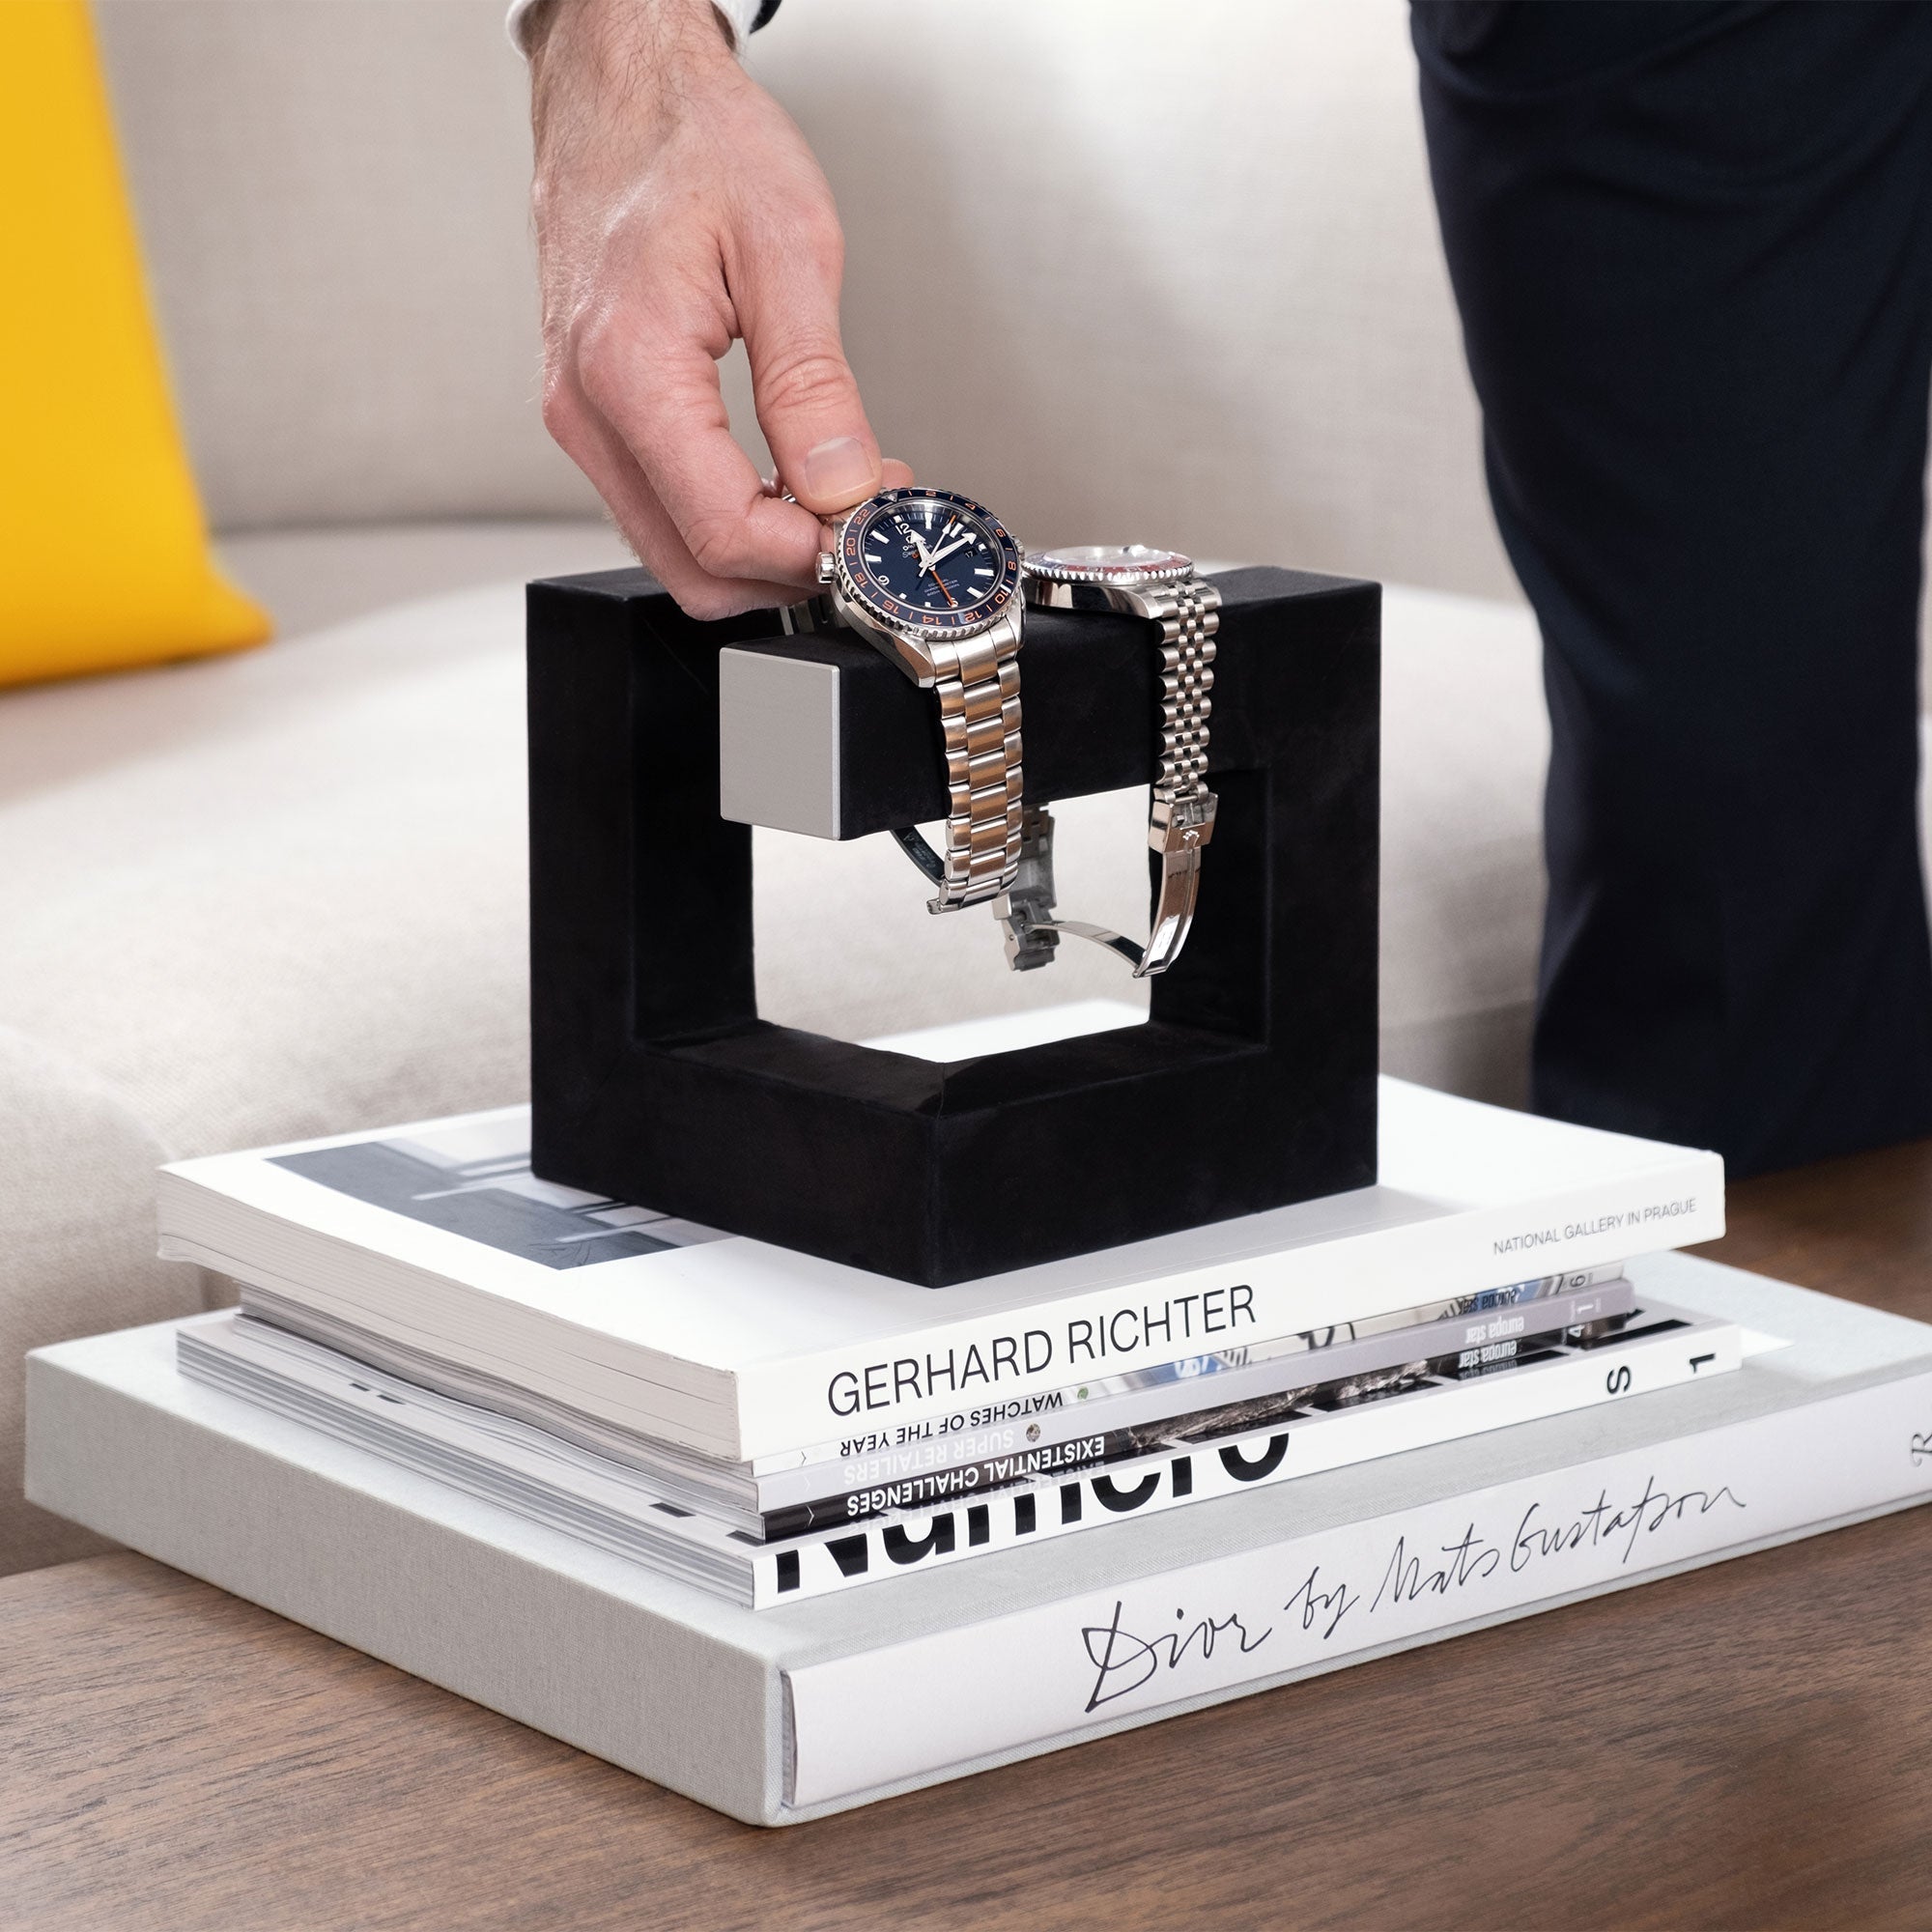 Watch collector taking his Omega from his Charles Simon Hudson 3 luxury watch stand